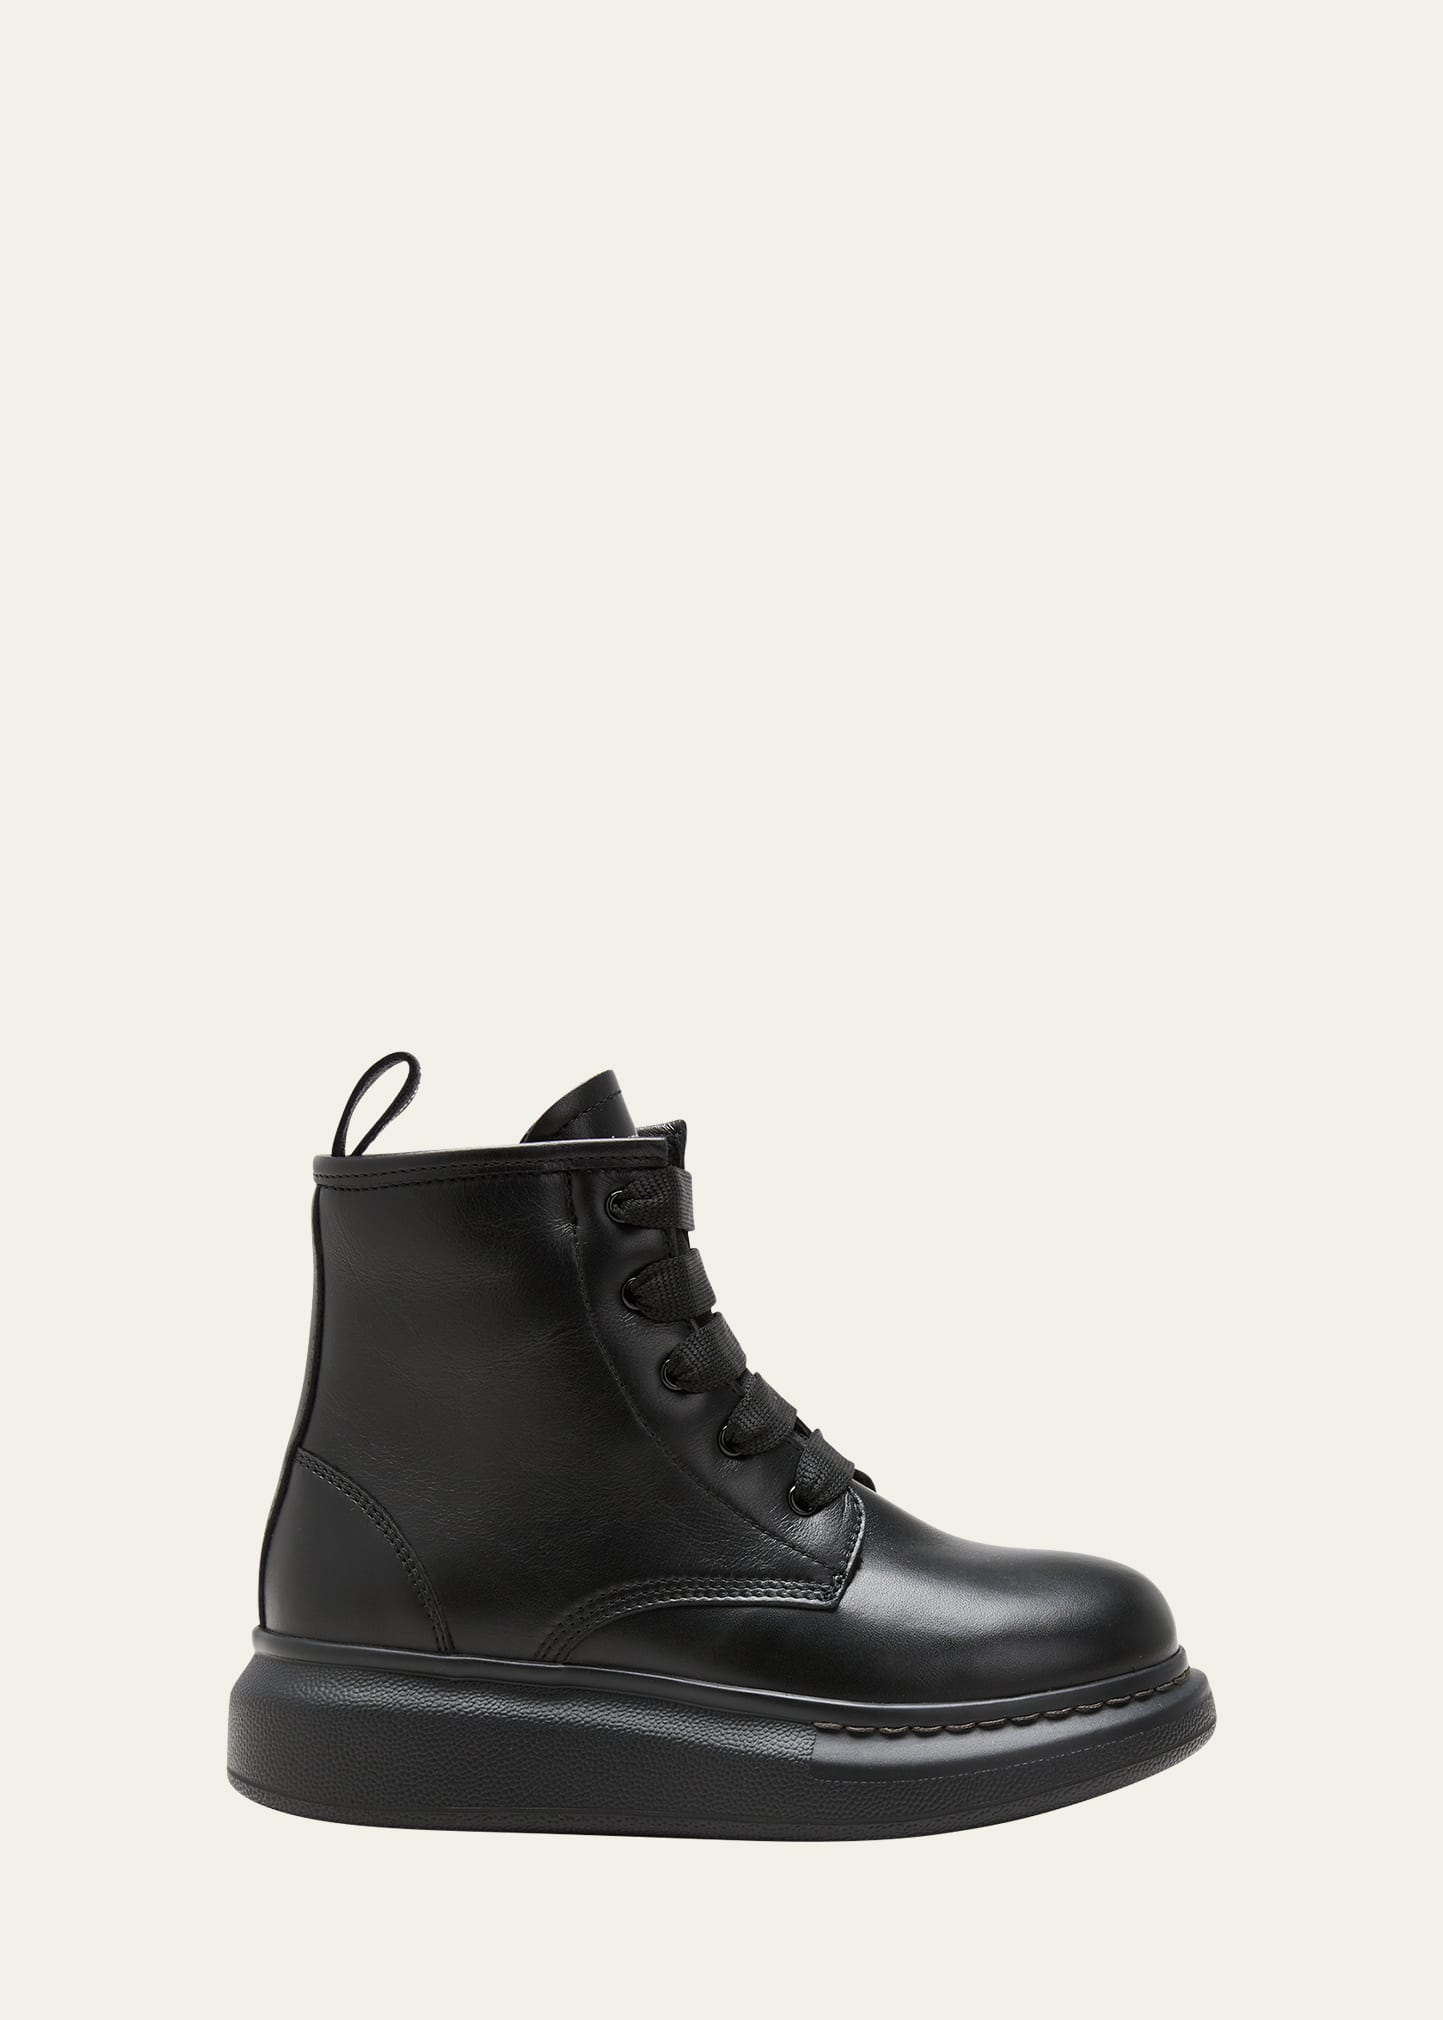 Alexander Mcqueen Kid's Leather Lace Up Boots, Toddlers/kids In Black